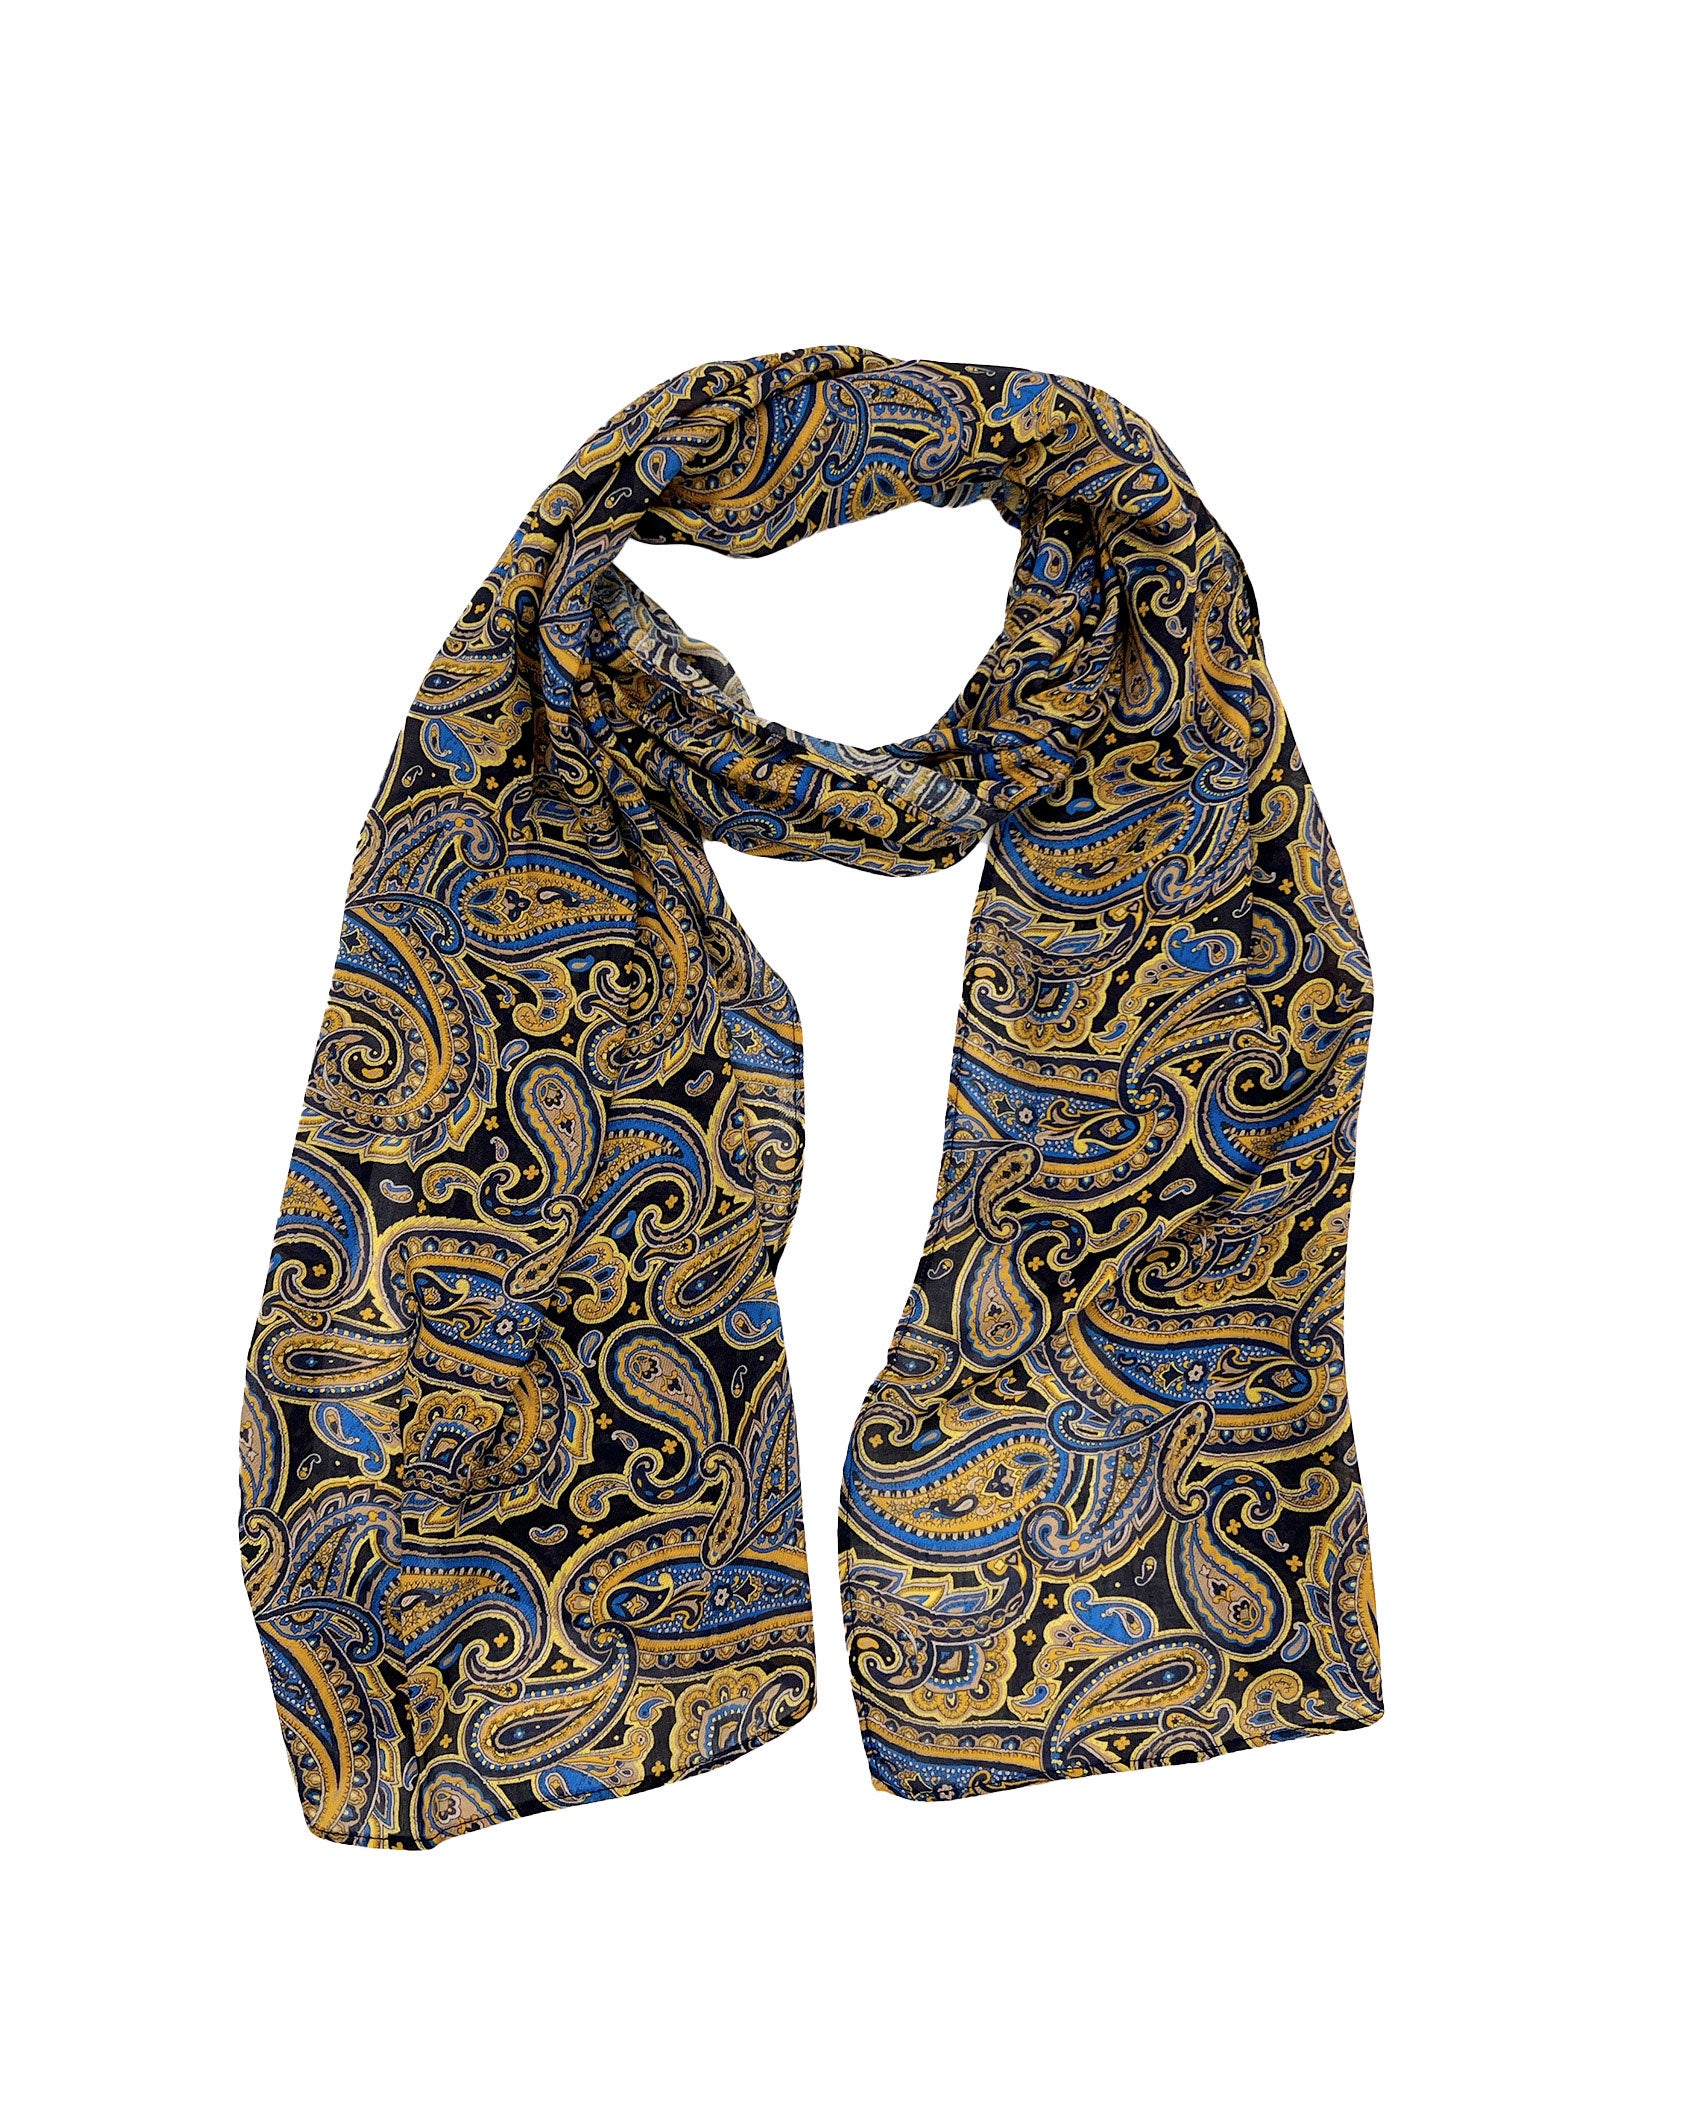 The Ormond wide scarf unravelled and looped in the middle, demonstrating the considerable length and showing  blue, yellow and gold patterns on a black ground.